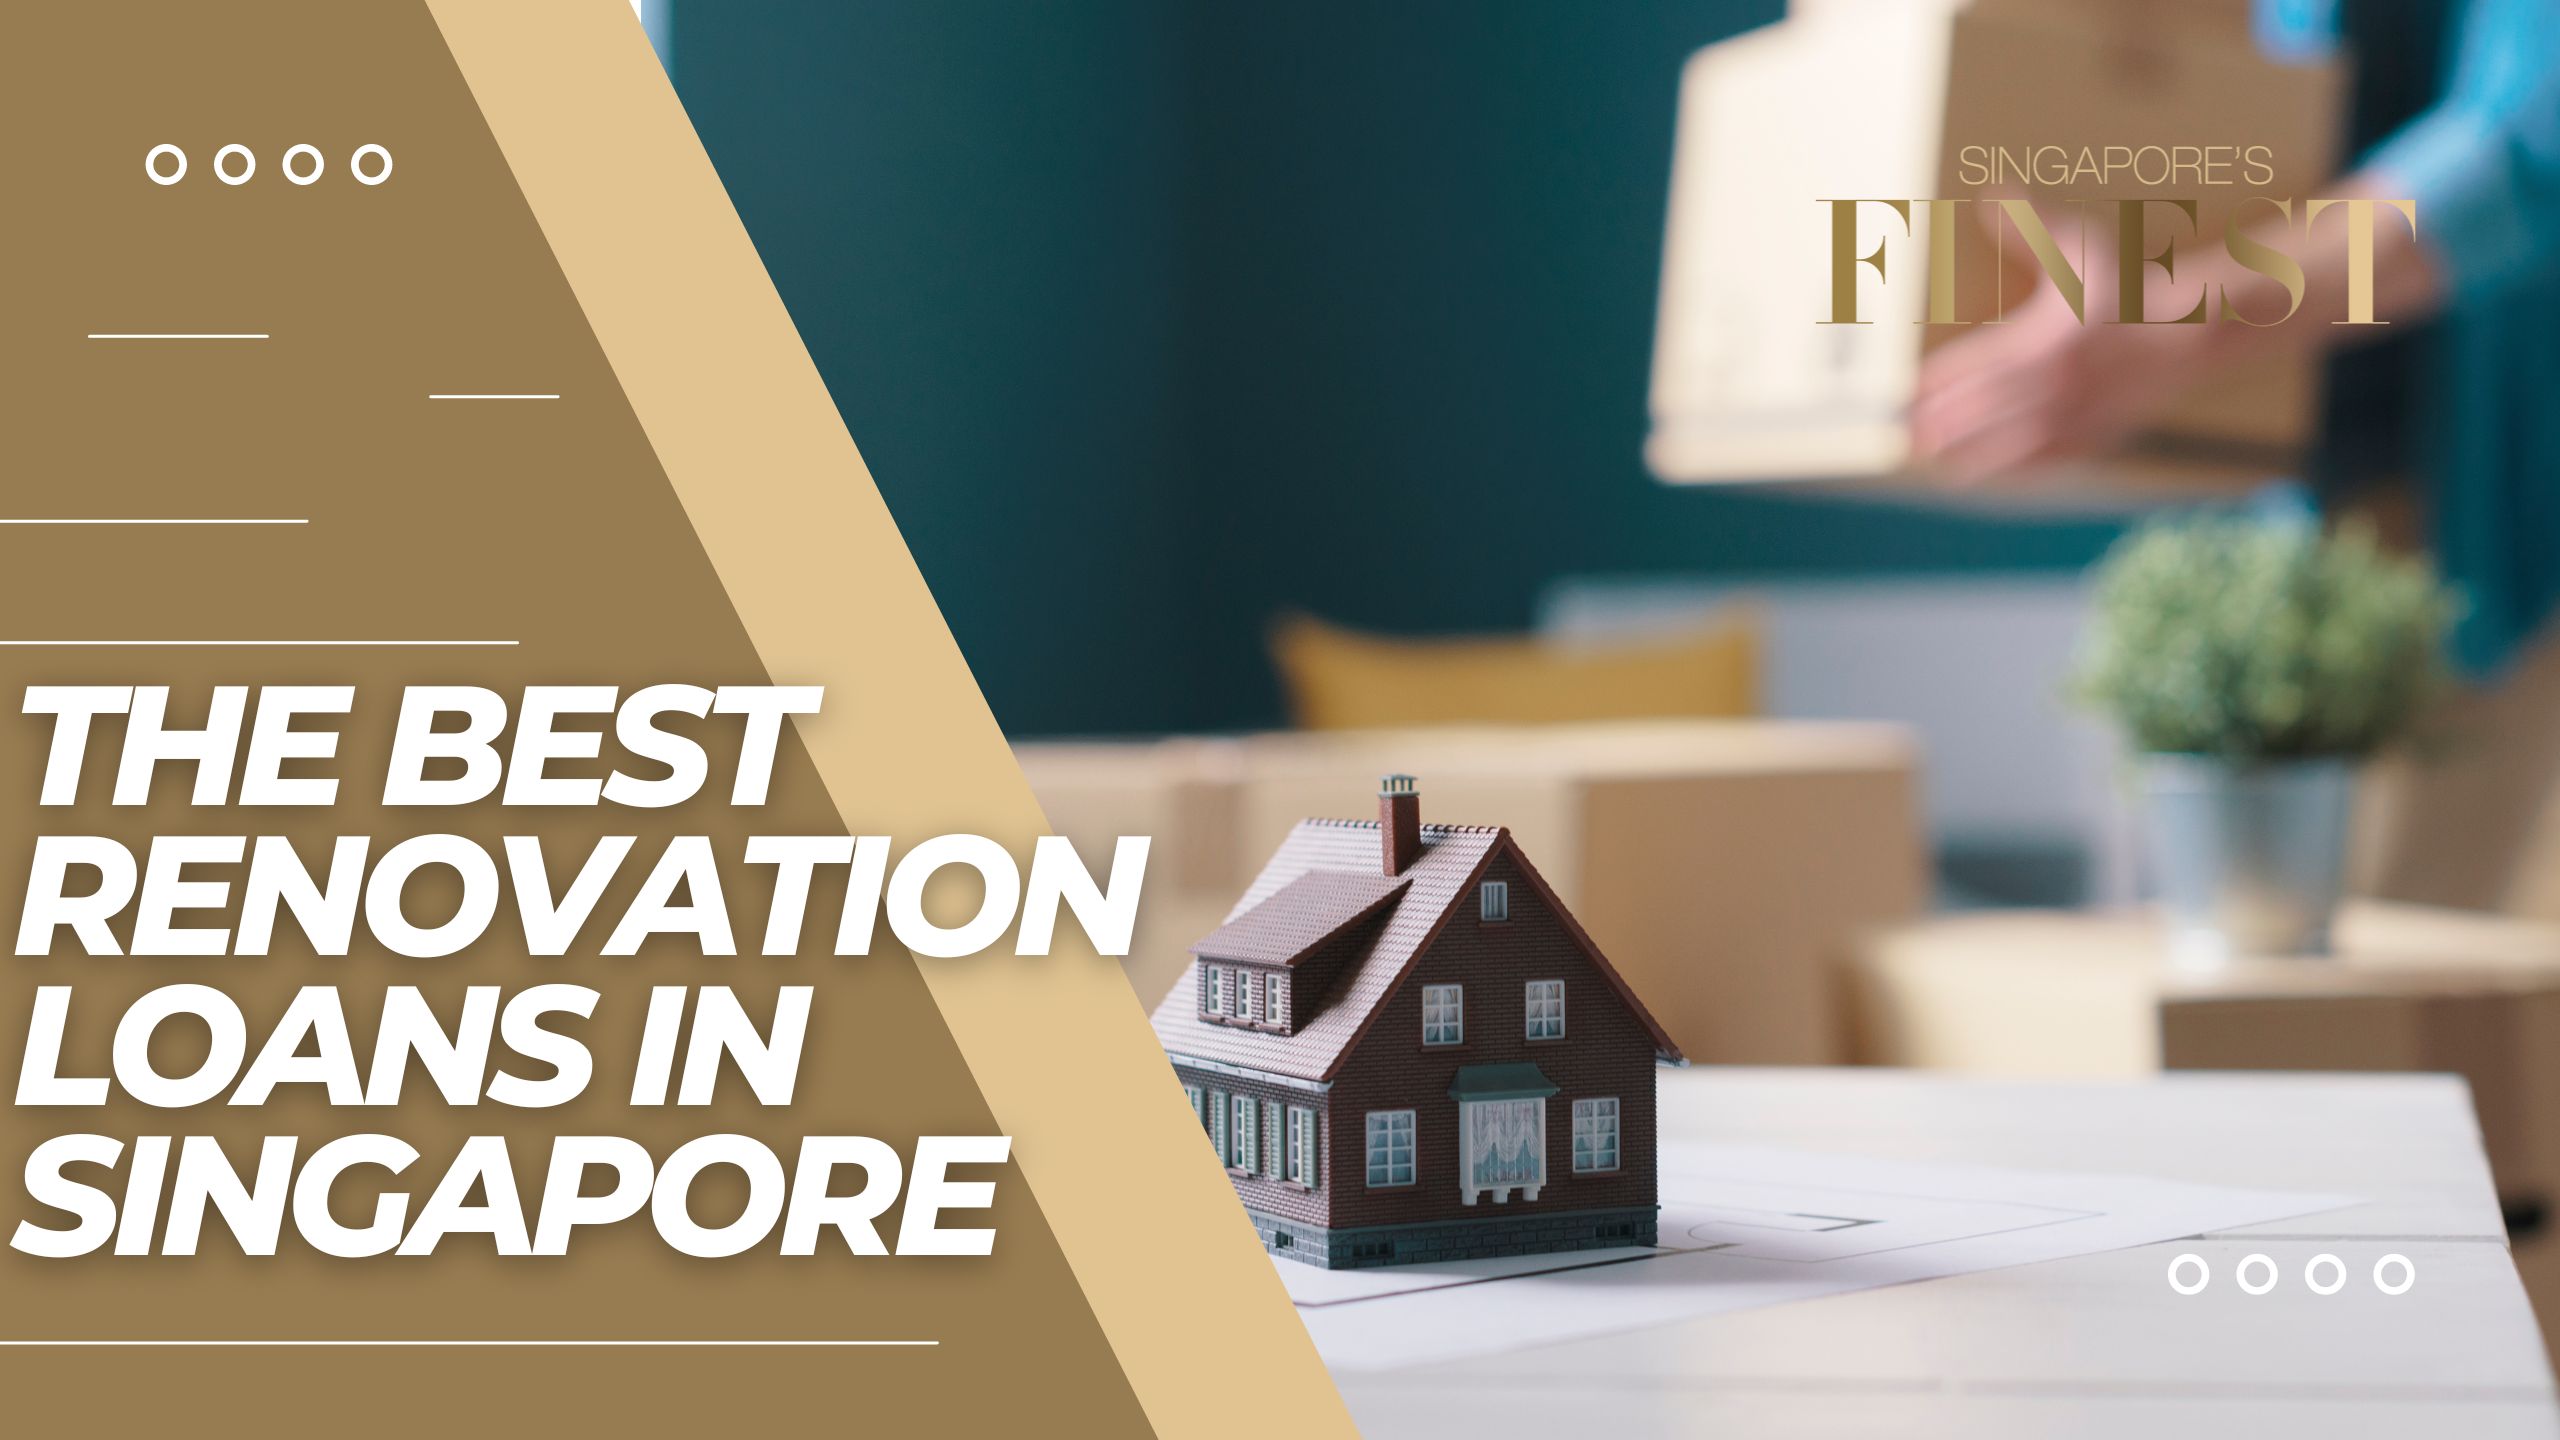 The Finest Renovation Loans in Singapore